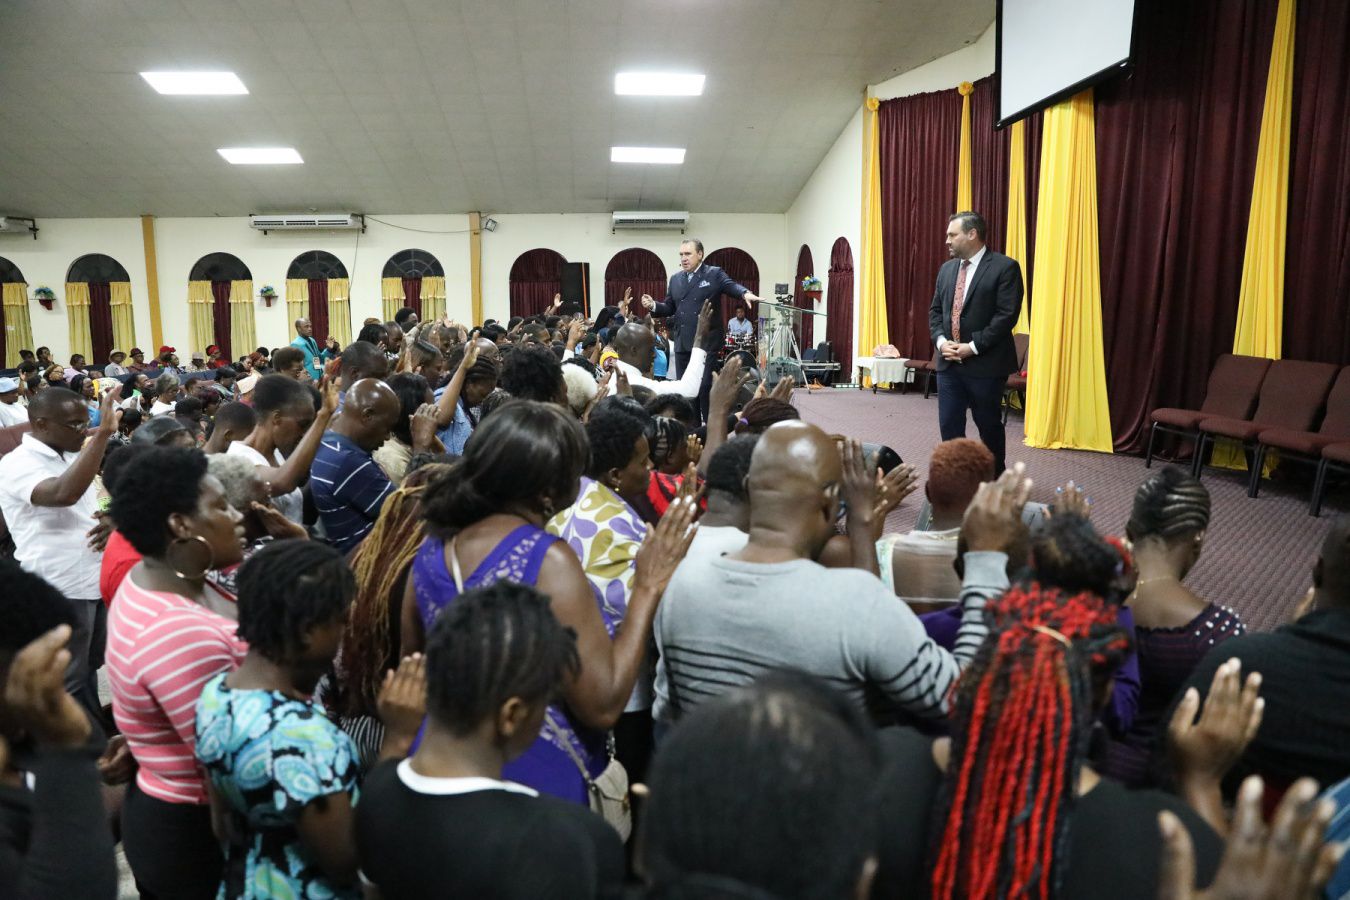 Caribbean Ablaze Update: Lives Are Being Changed by the Fire of God!